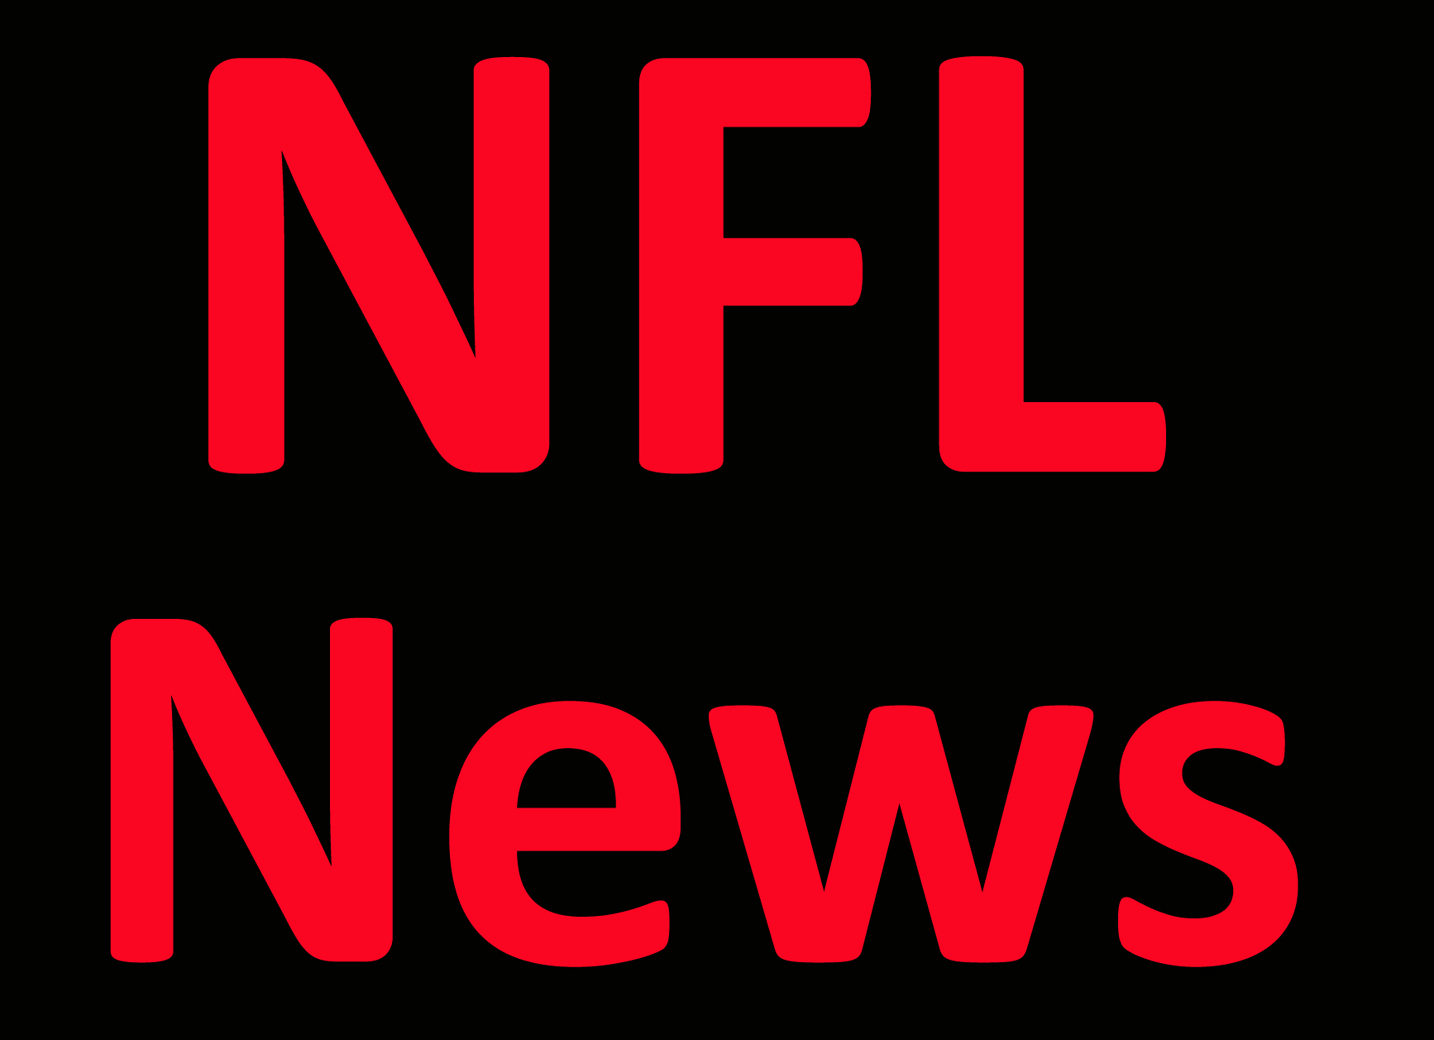 NFL News: Daily Notes: Williams done for the season, Taylor avoids major injury Per Report